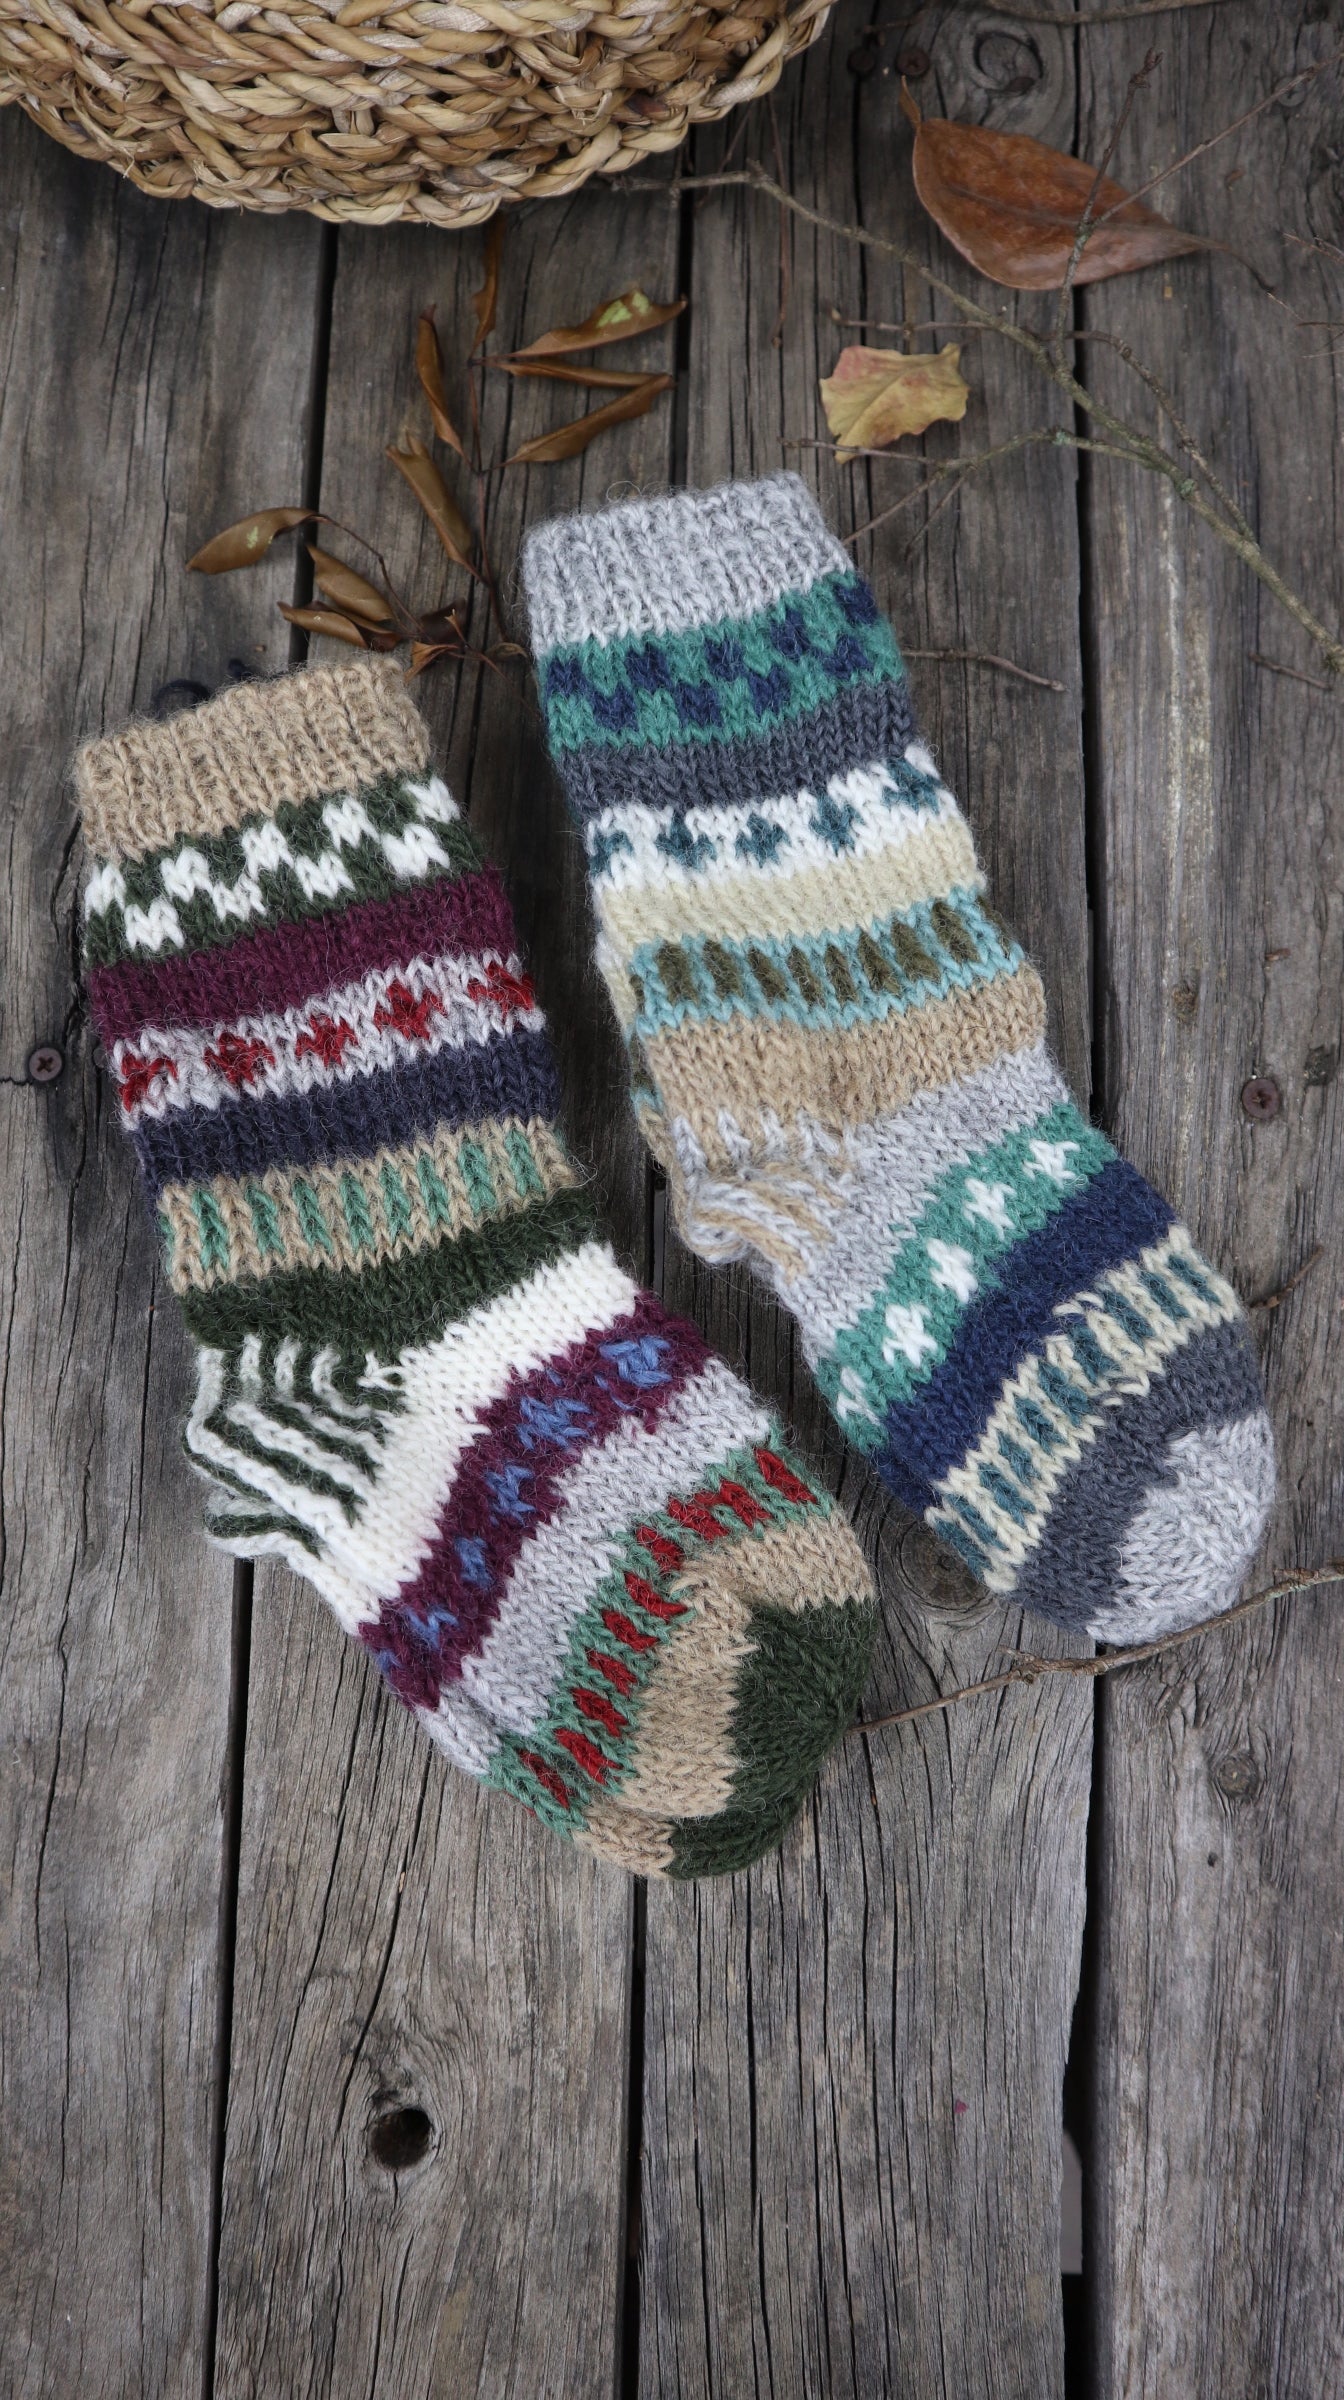 Fair Trade Ethical Children's Woollen Patterned Socks in Green, Grey and White